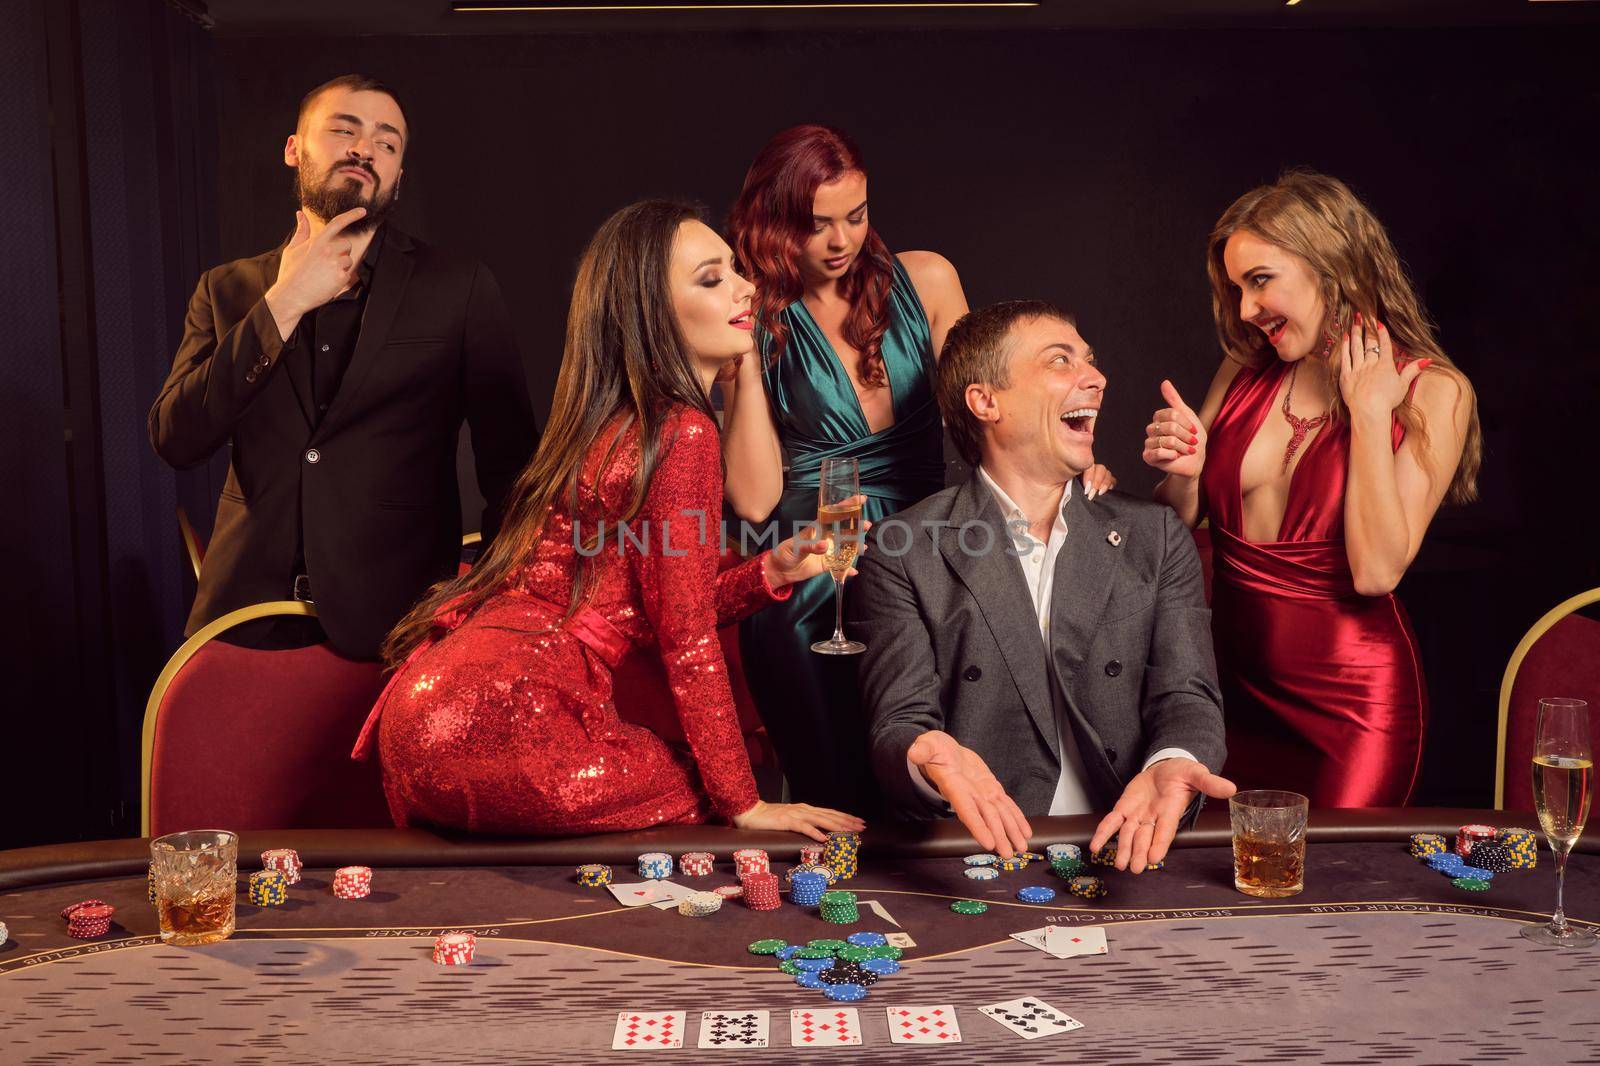 Optimistic friends are playing poker at casino. They are celebrating their win, smiling and looking vey excited while posing at the table against a dark background. Cards, chips, money, alcohol, gambling, entertainment concept.